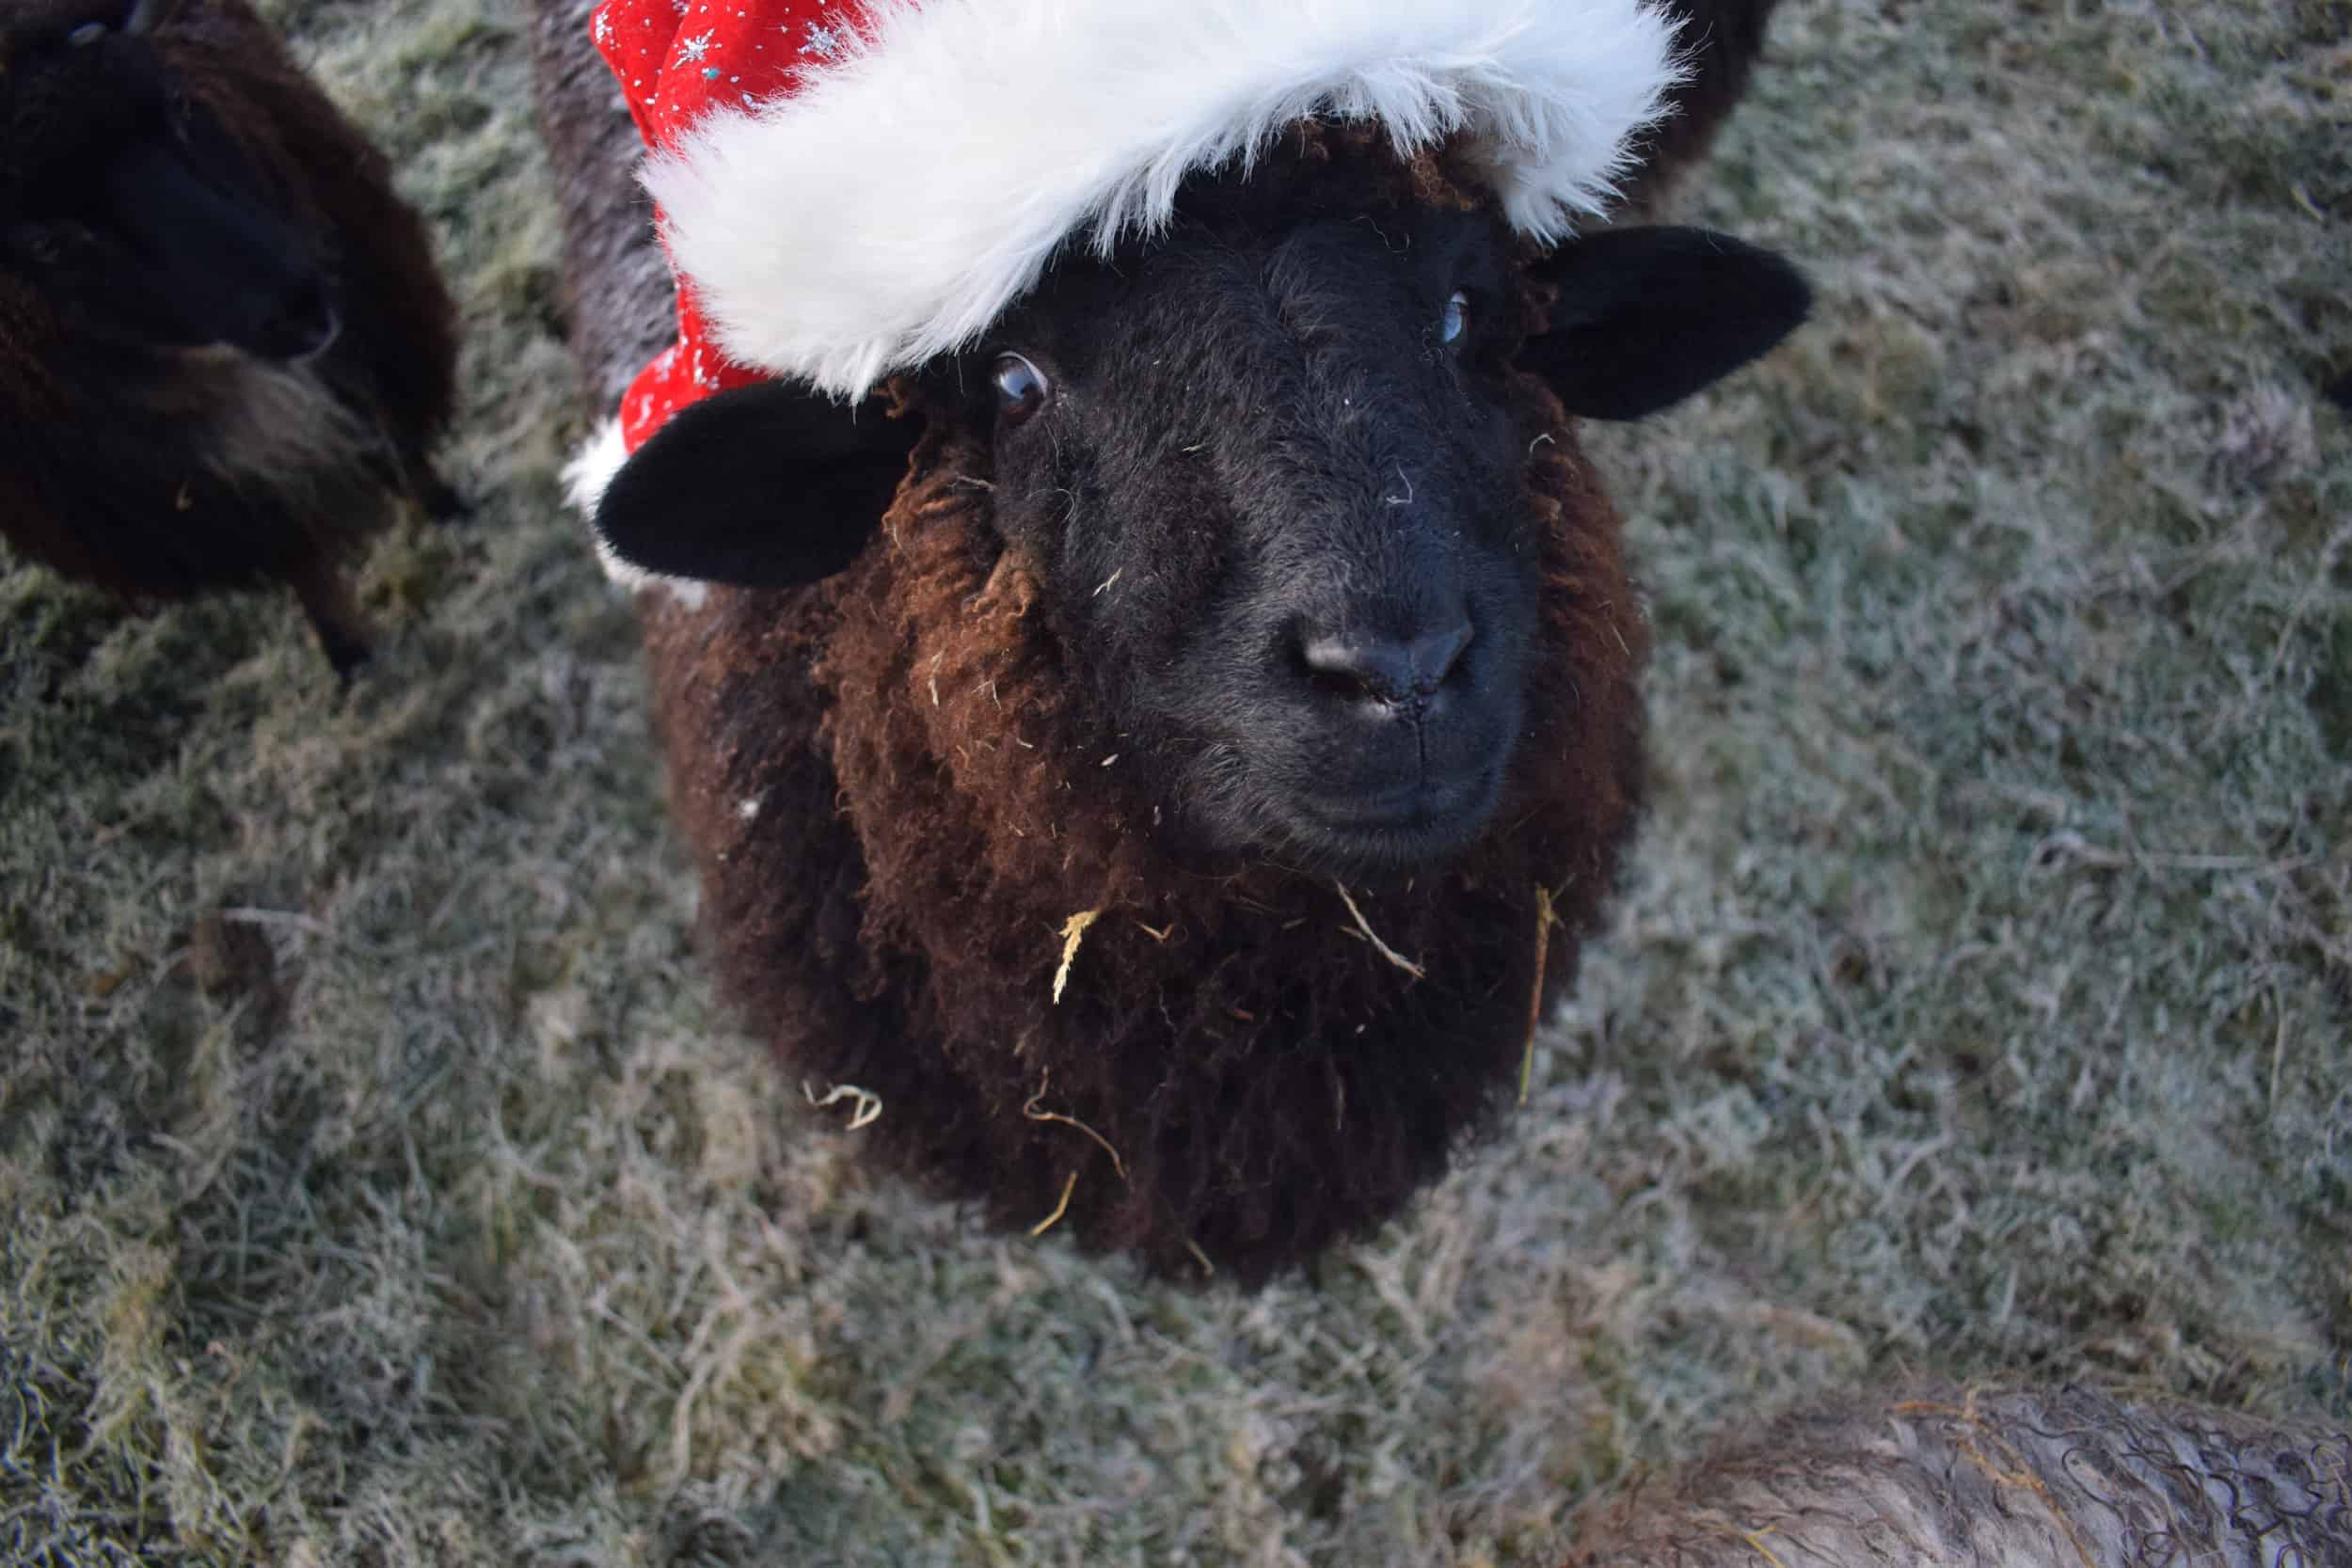 Spot santa hat xmas valais blacknose cross zwables texel sheep pet sheep ethical sustainable wool gifts patchwork sheep black